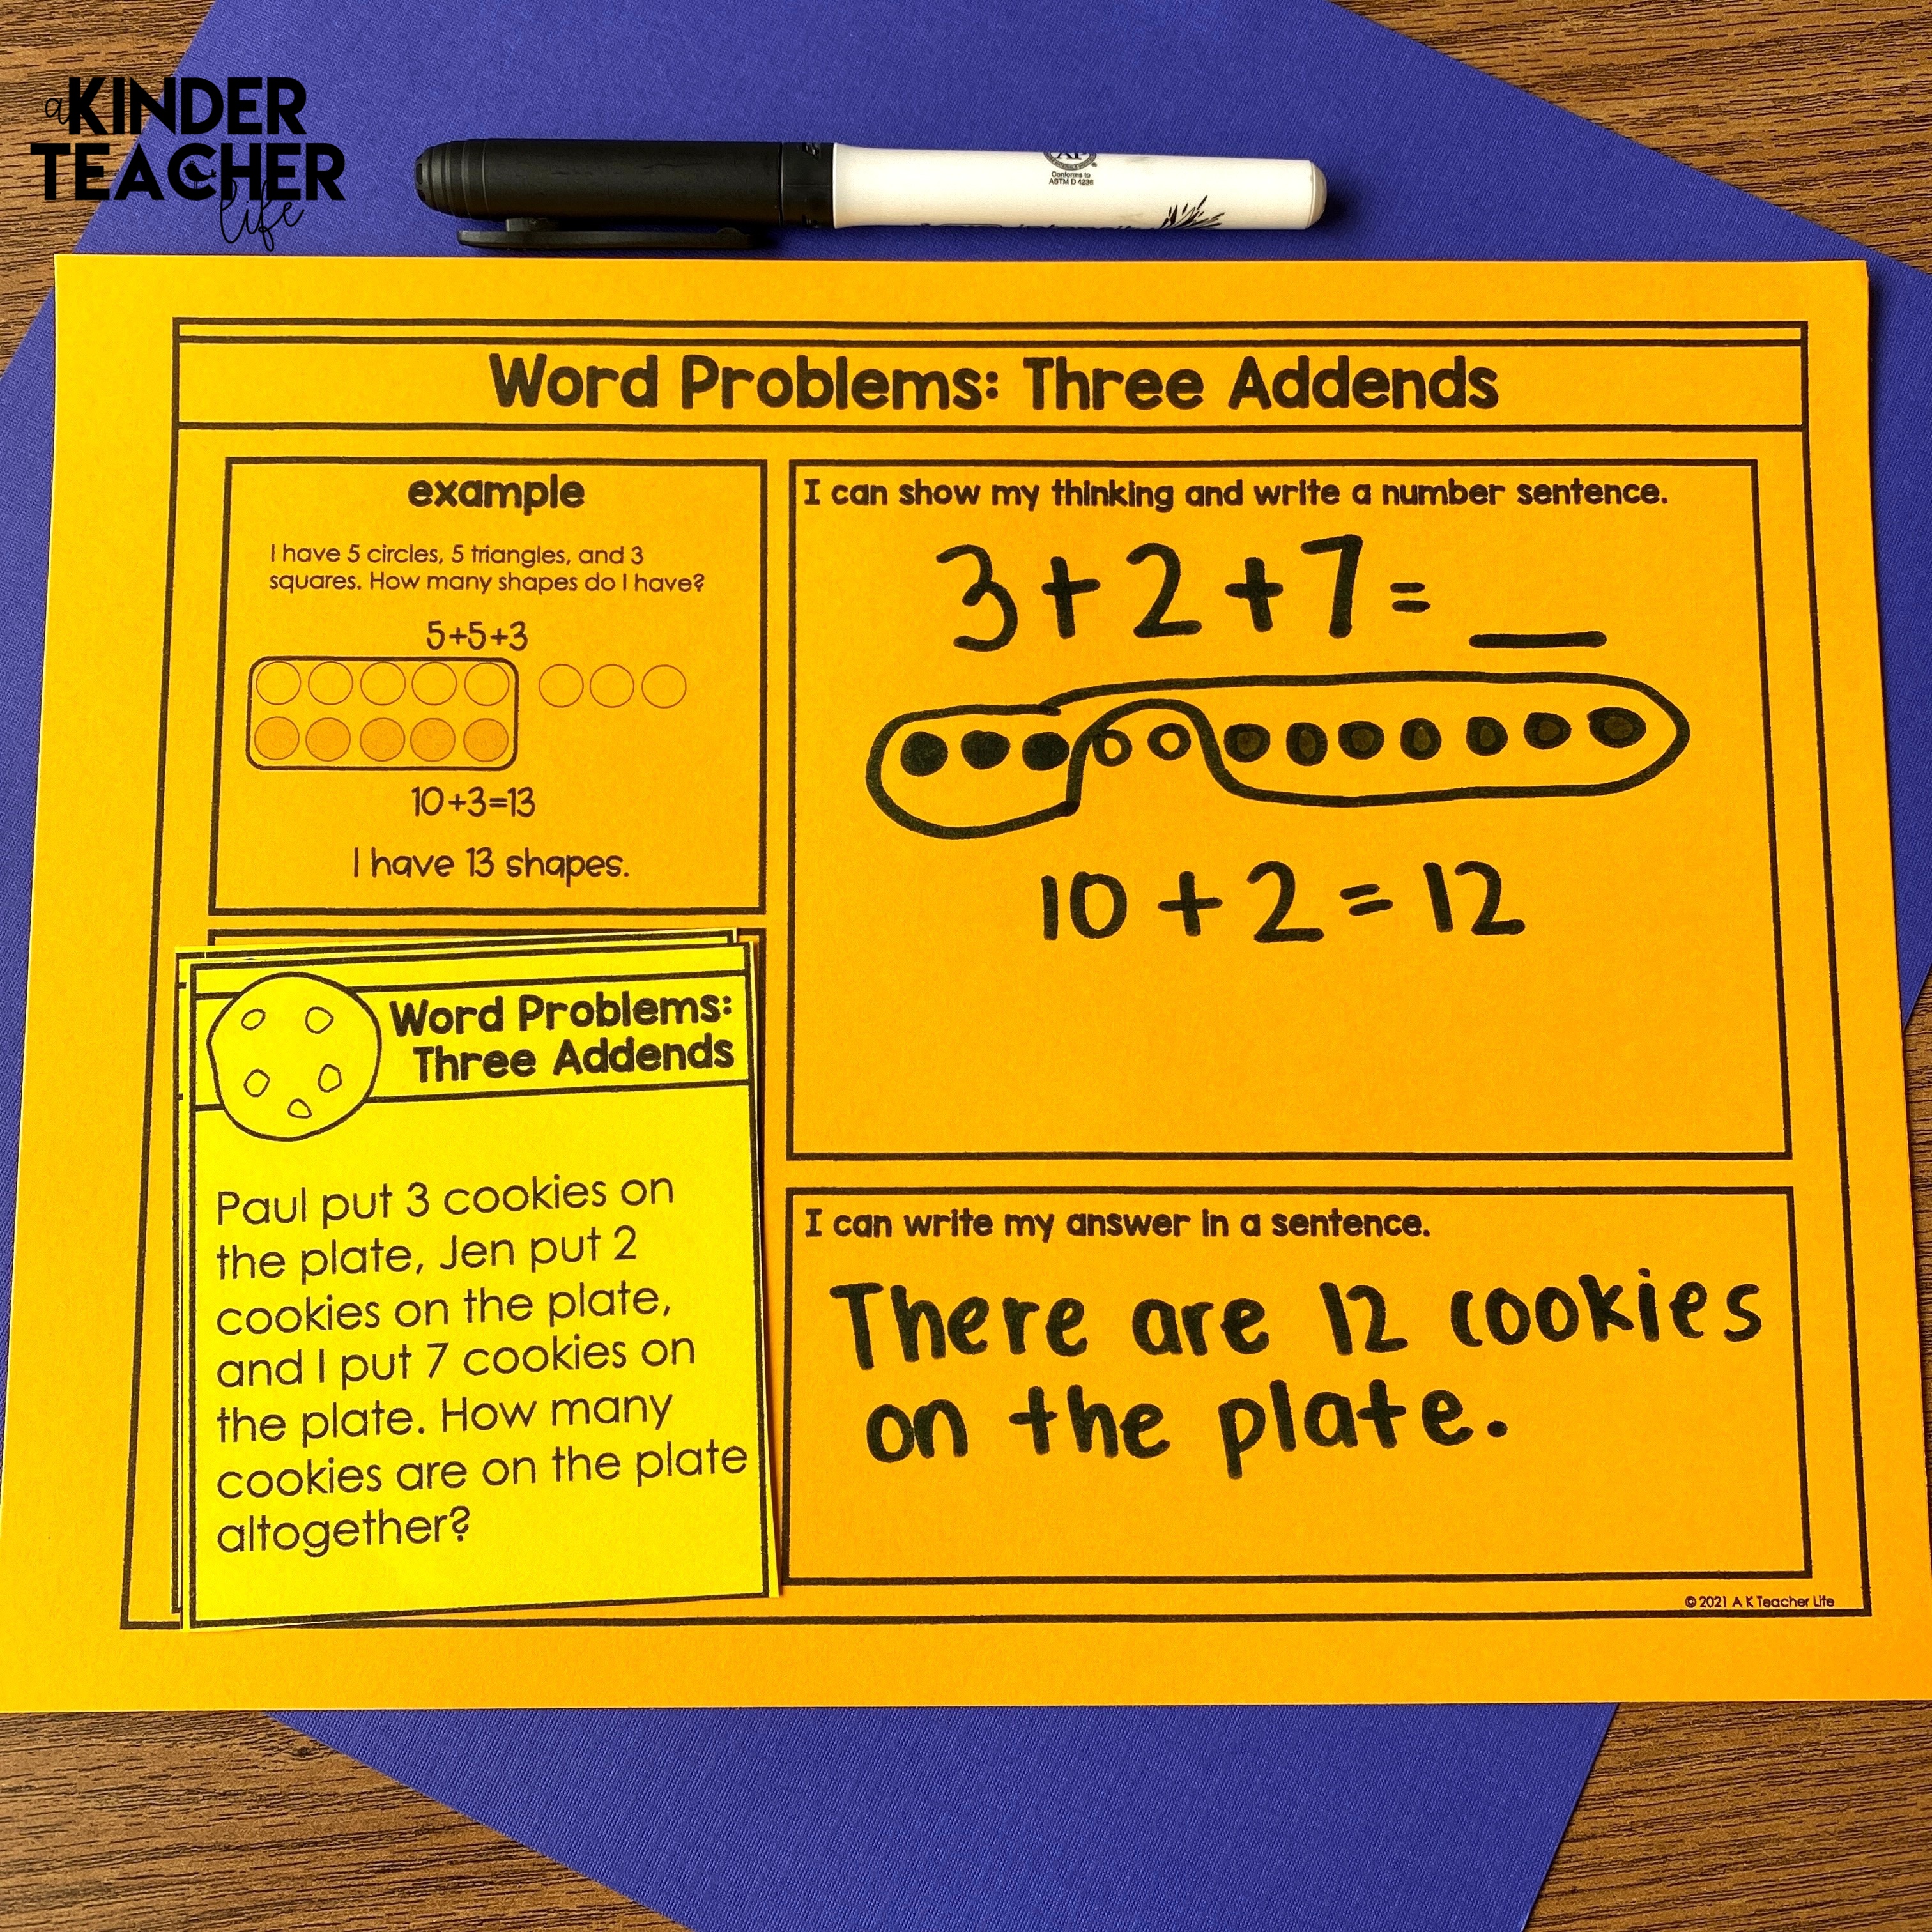 Word problems - Addition math center activities and worksheets